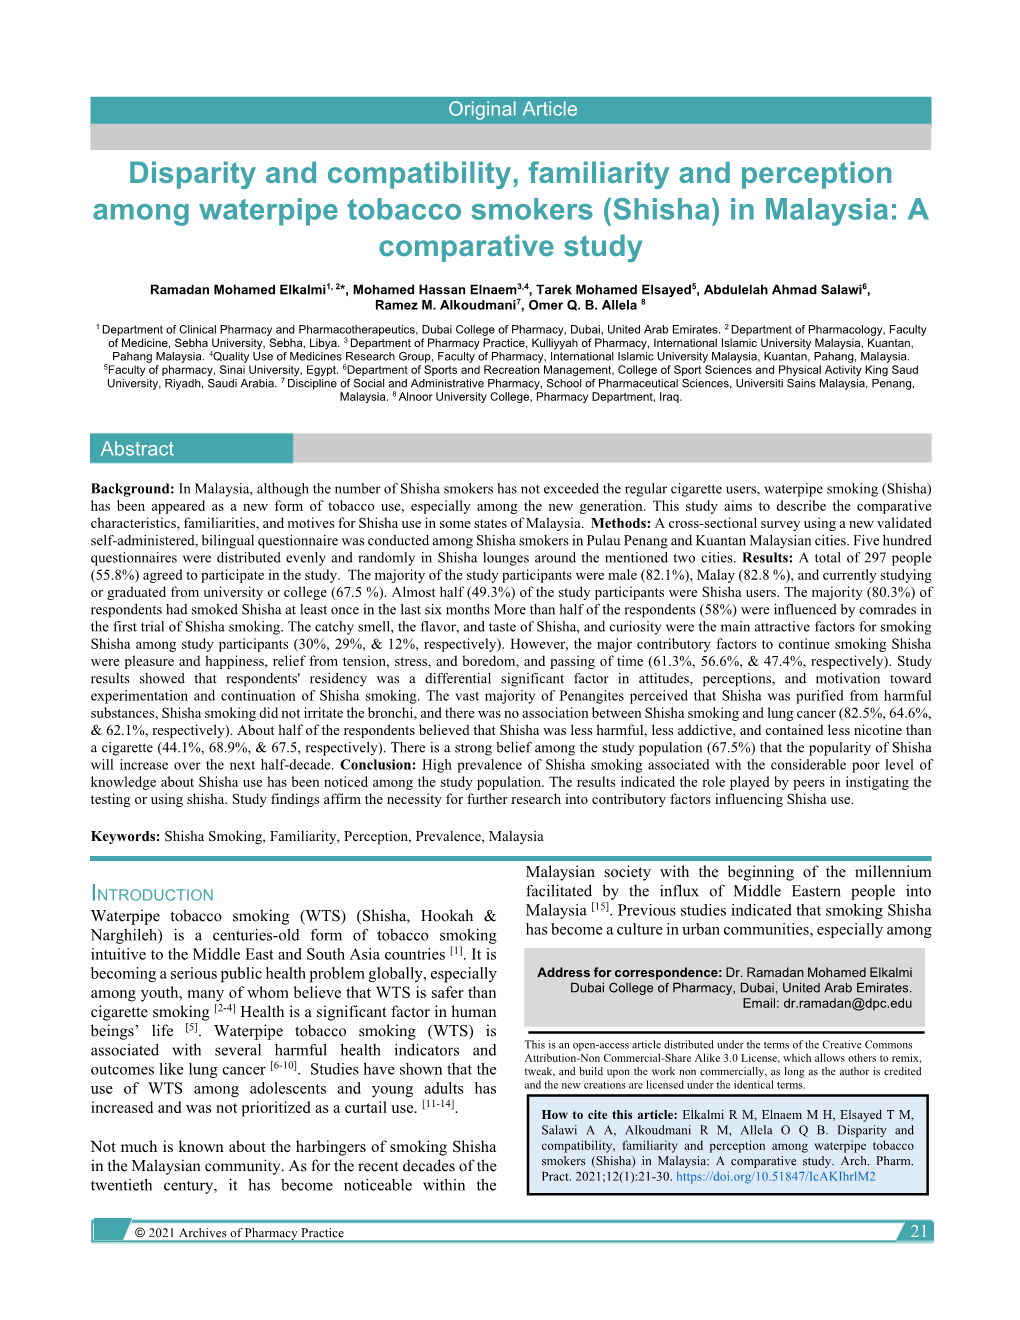 Disparity and Compatibility, Familiarity and Perception Among Waterpipe Tobacco Smokers (Shisha) in Malaysia: a Comparative Study